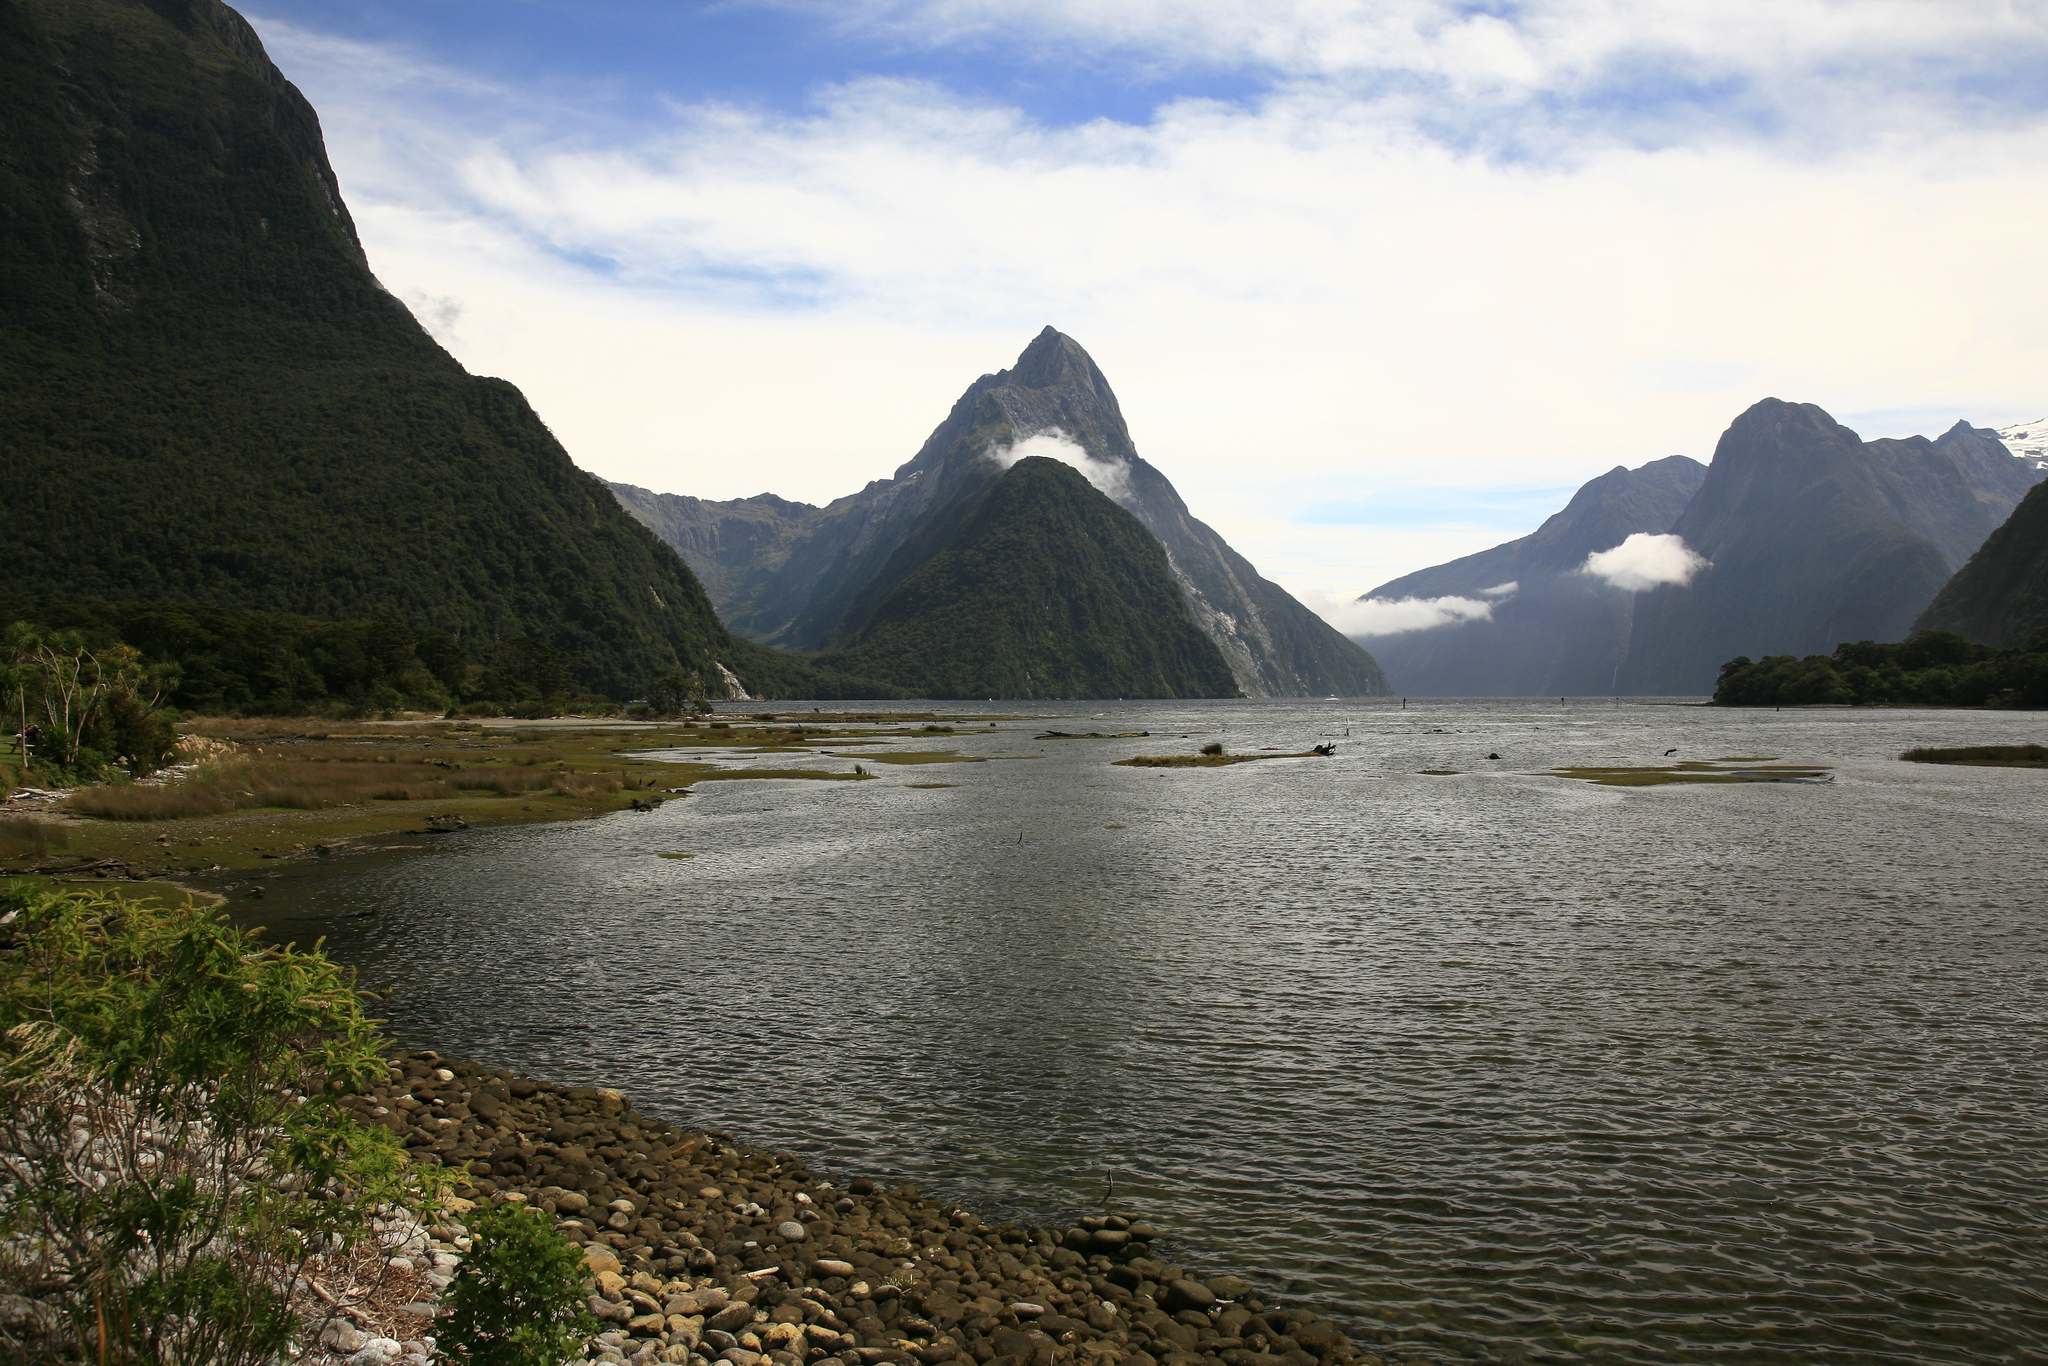 Overland Travel through the South Island of New Zealand will bring you to the shores of the most beautiful body of water you have ever seen - Milford Sound ...  photo by CC user vendin on Flickr 